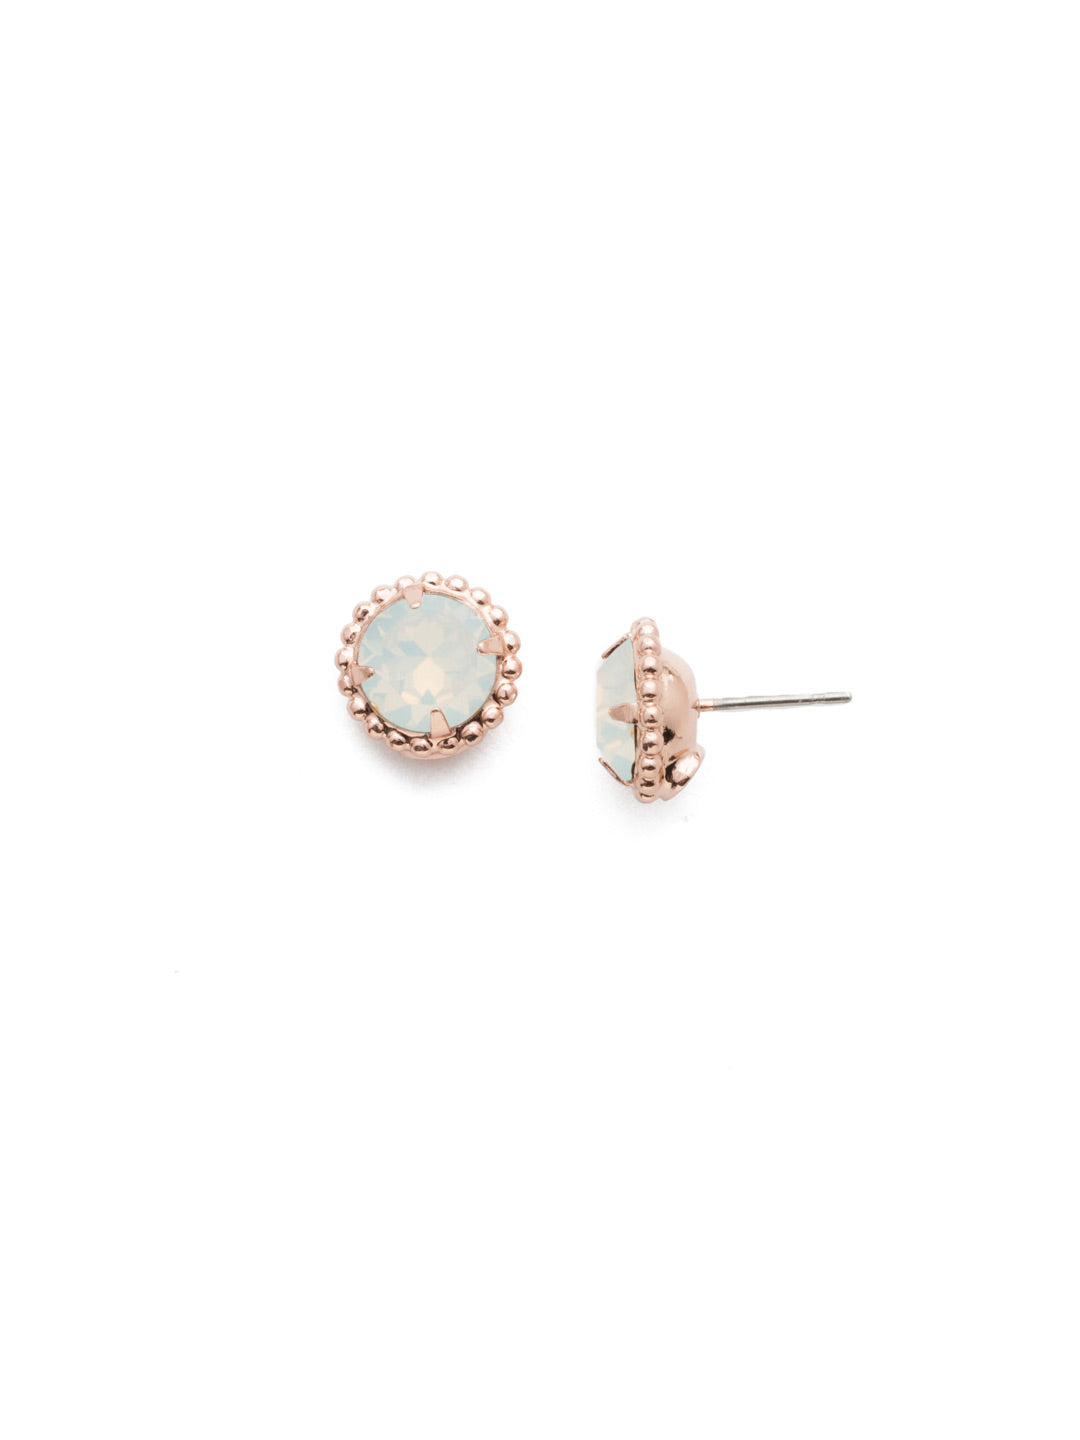 Simplicity Stud Earrings - EBY38RGWO - <p>A timeless classic, the Simplicity Stud Earrings feature round cut crystals in a variety of colors; accented with a halo of metal beaded detail. Need help picking a stud? <a href="https://www.sorrelli.com/blogs/sisterhood/round-stud-earrings-101-a-rundown-of-sizes-styles-and-sparkle">Check out our size guide!</a> From Sorrelli's White Opal collection in our Rose Gold-tone finish.</p>